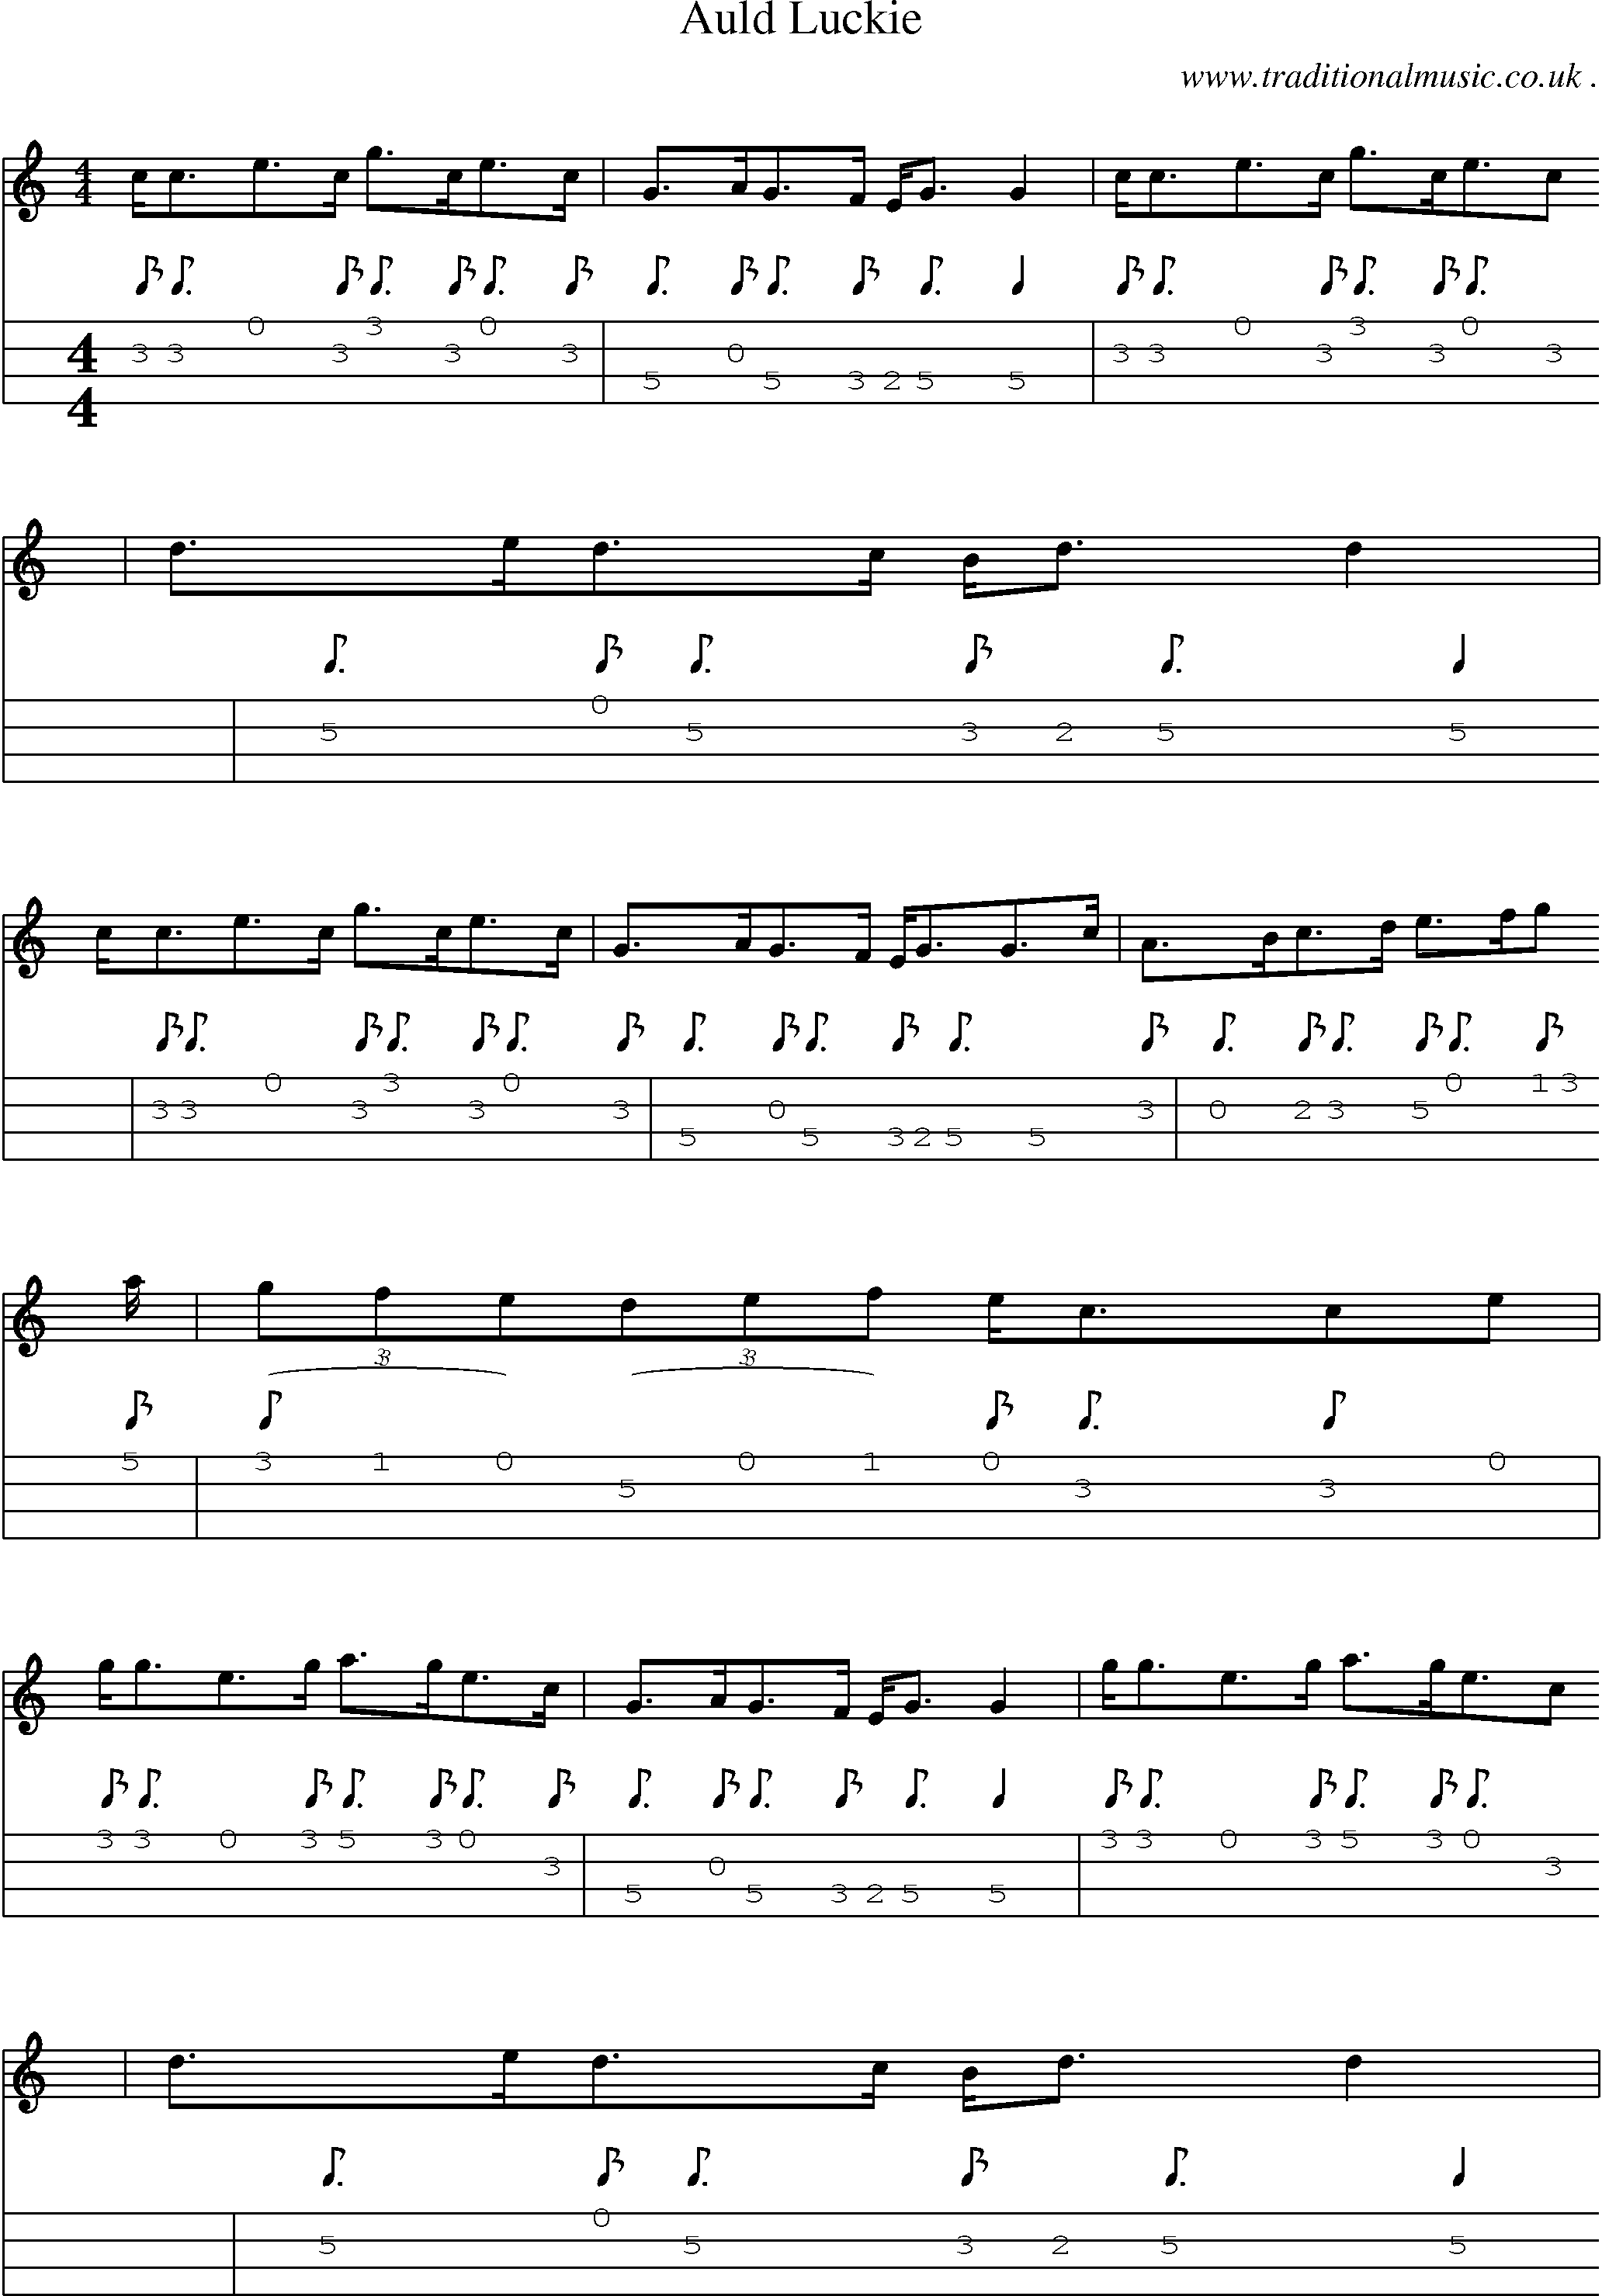 Sheet-Music and Mandolin Tabs for Auld Luckie